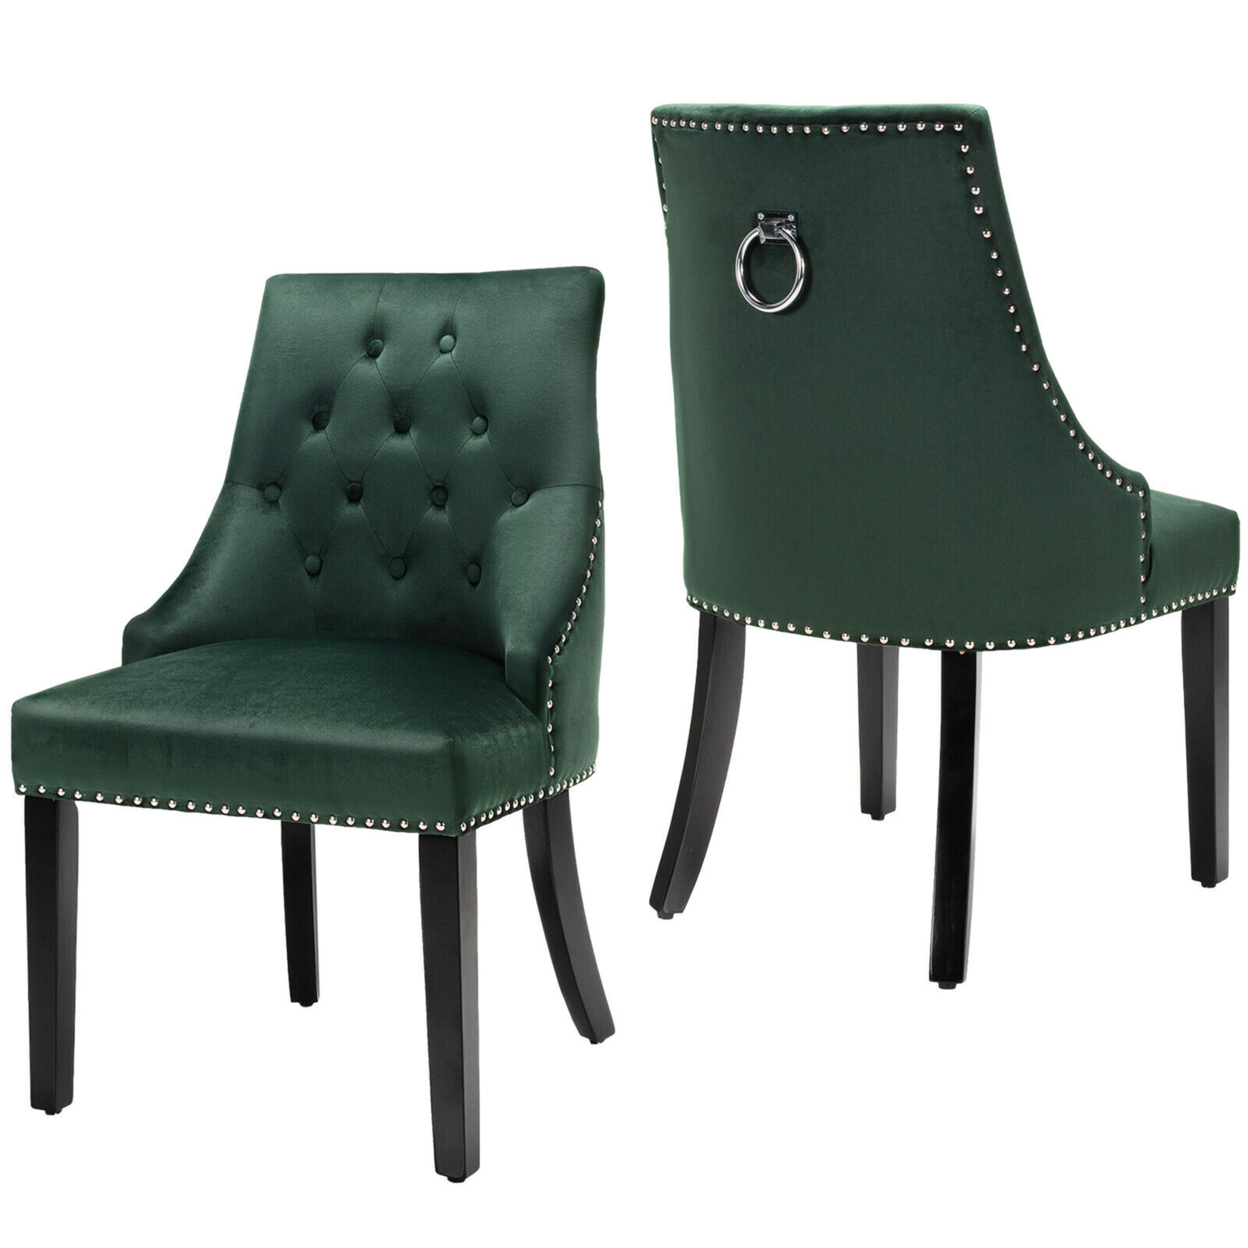 Set Of 2 Button-Tufted Dining Chair Upholstered Armless Side Chair - Green